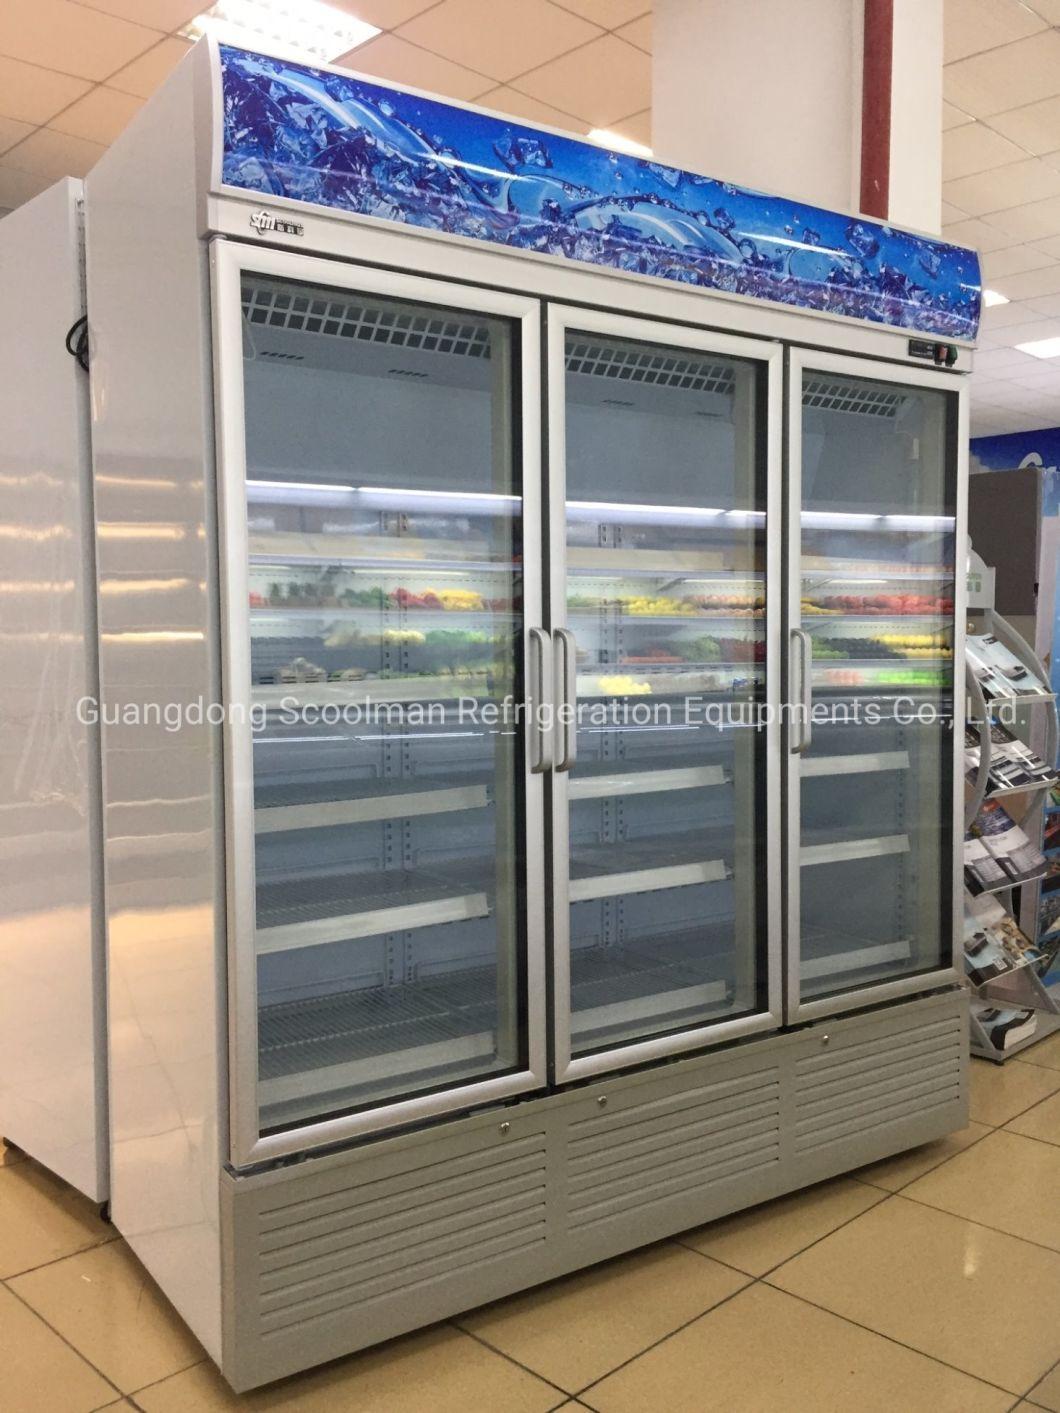 Hot Sale Glass 3 Door Beverage Display Refrigerating Showcase for Coke and Pesi